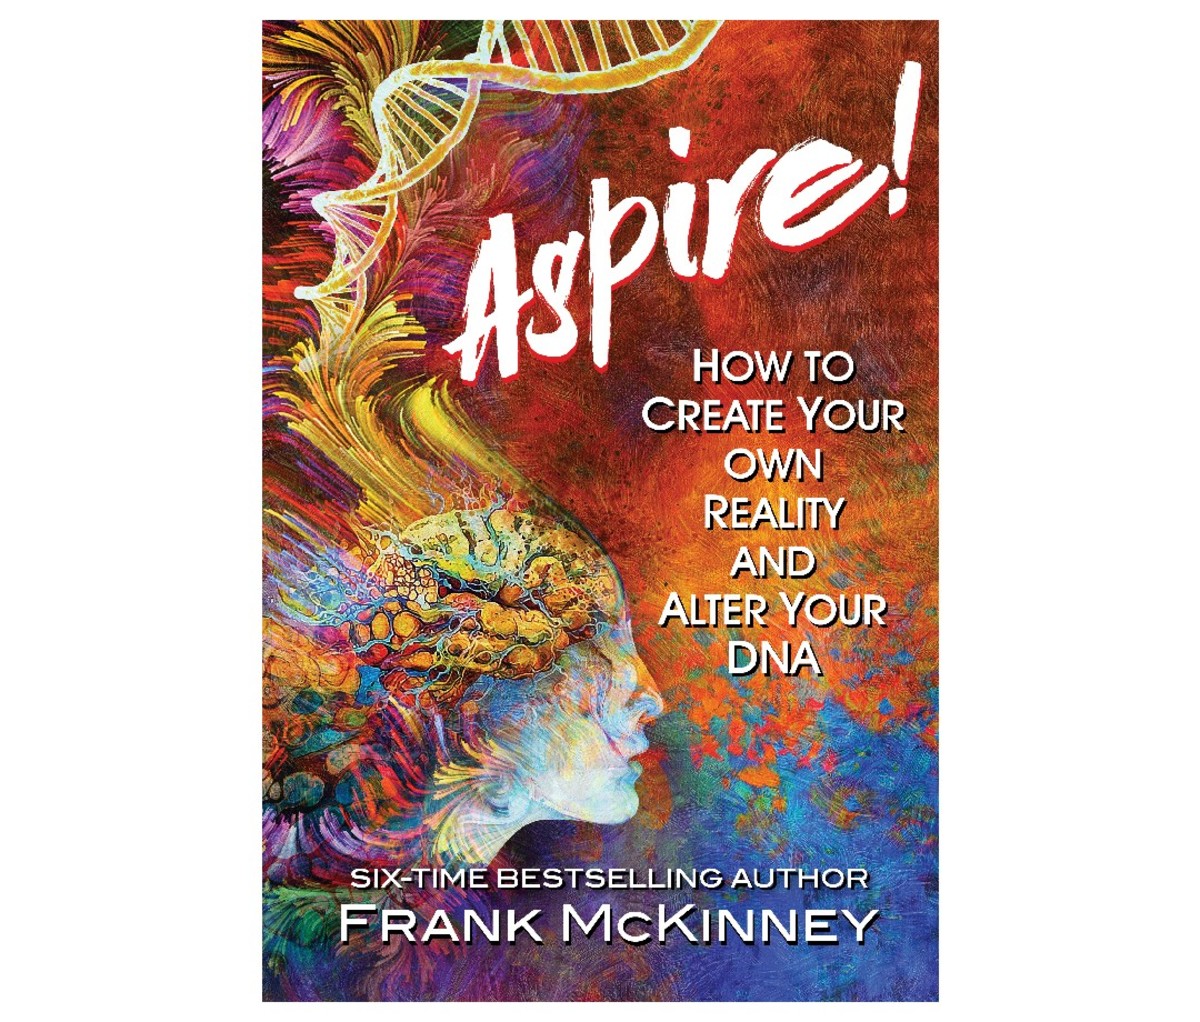 Aspire!: How to Create Your Own Reality and Alter Your DNA by Frank McKinney